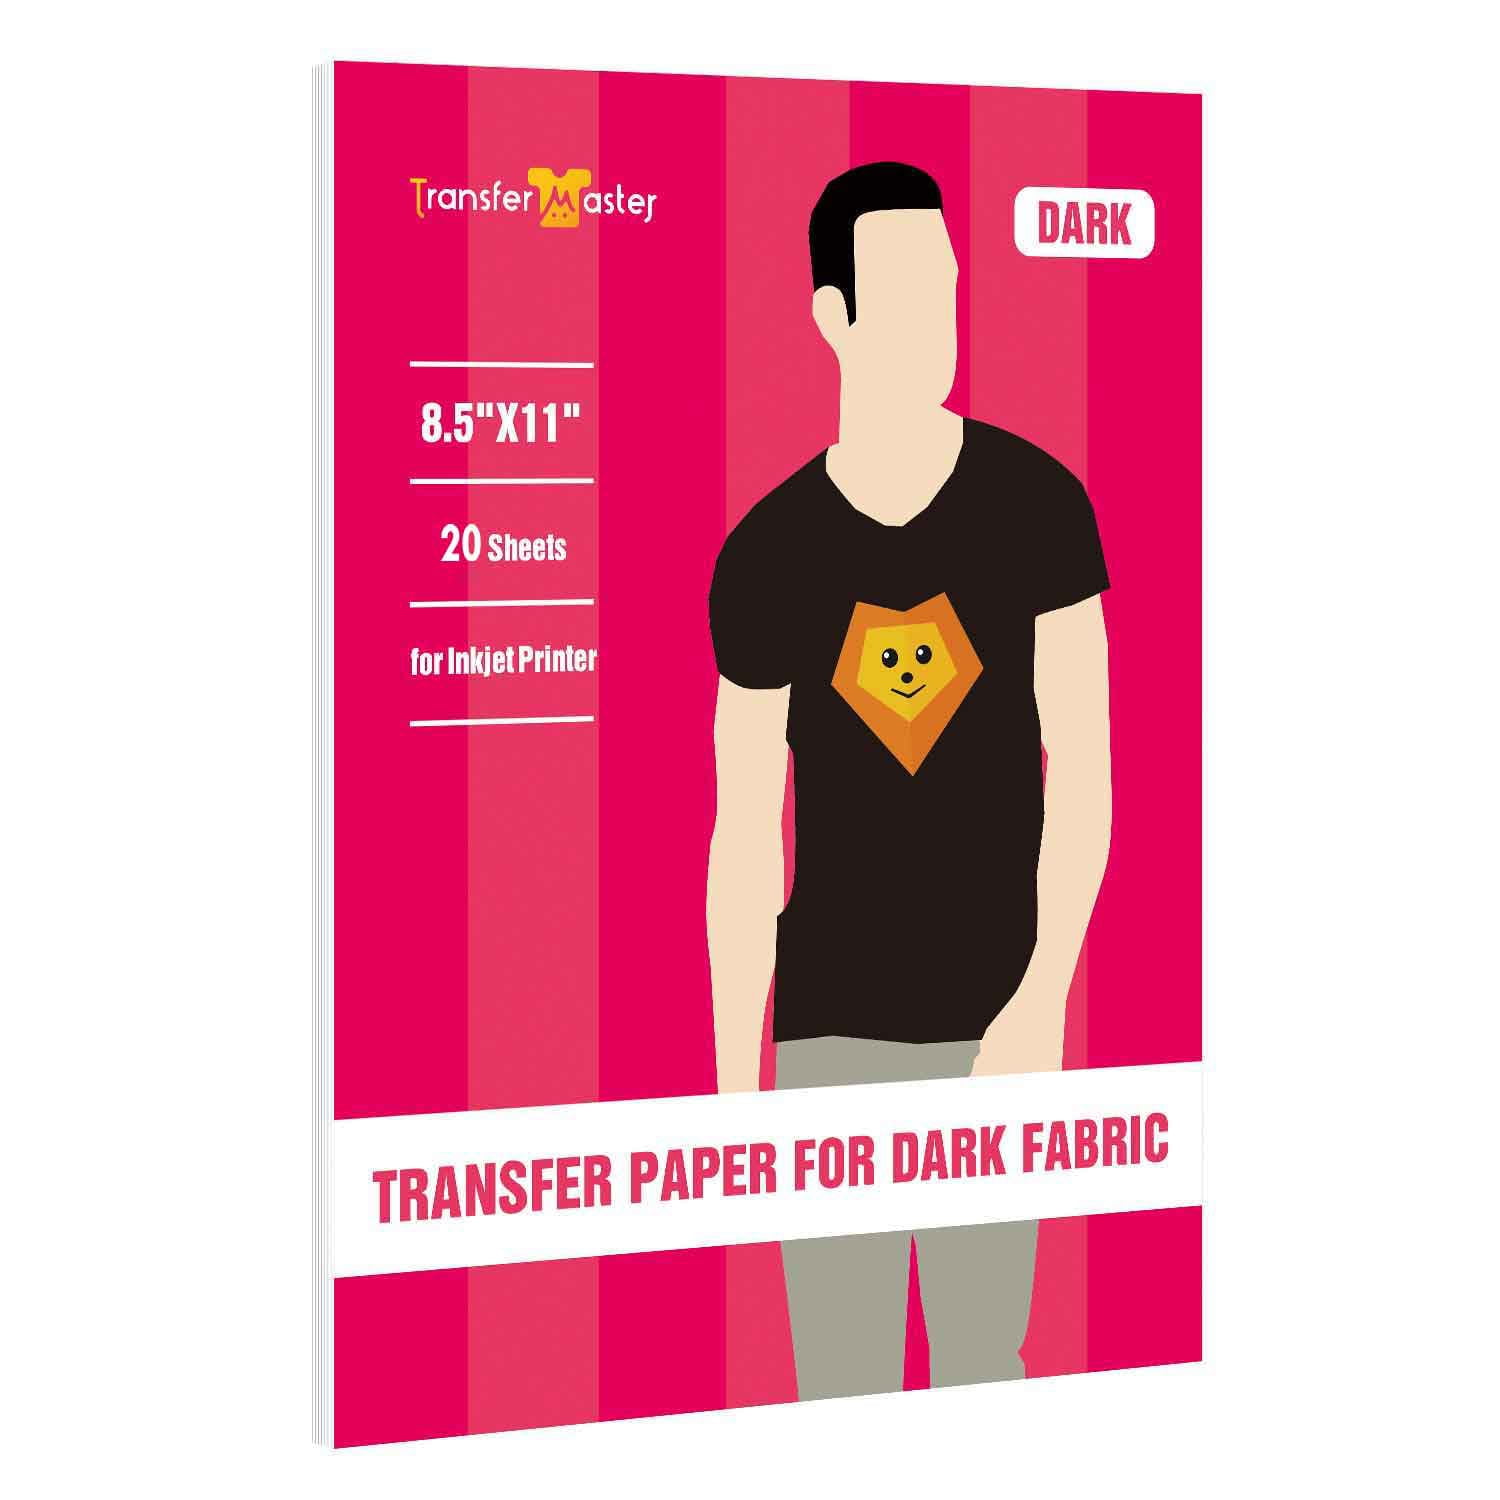 HTVRONT Heat Transfer Paper for T Shirts 20 Sheets 8.5 X 11